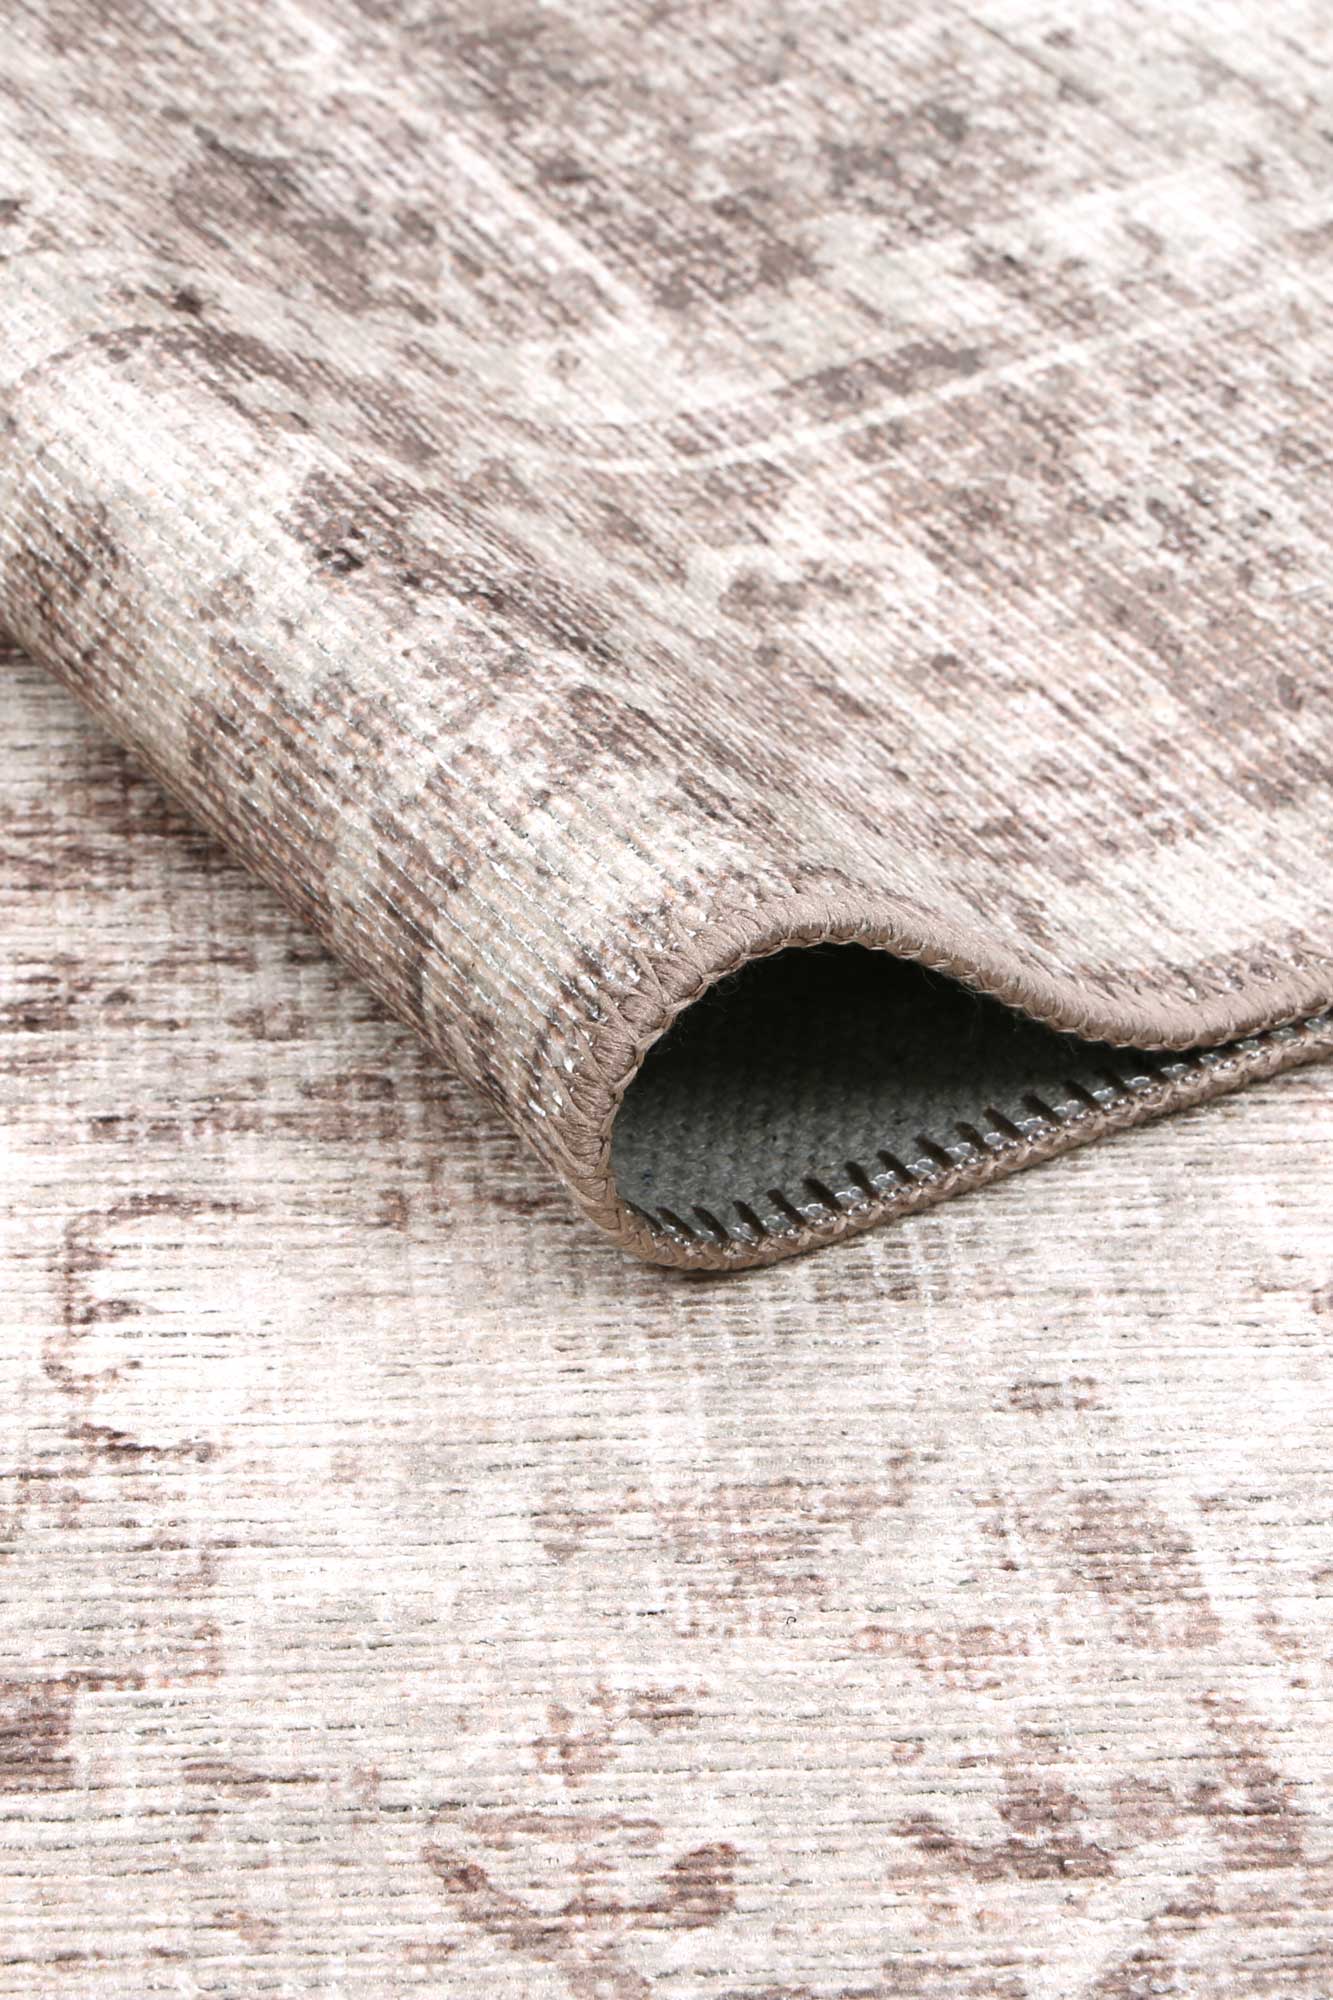 Chateau Touch Of Elegance In Beige : Runner Rug